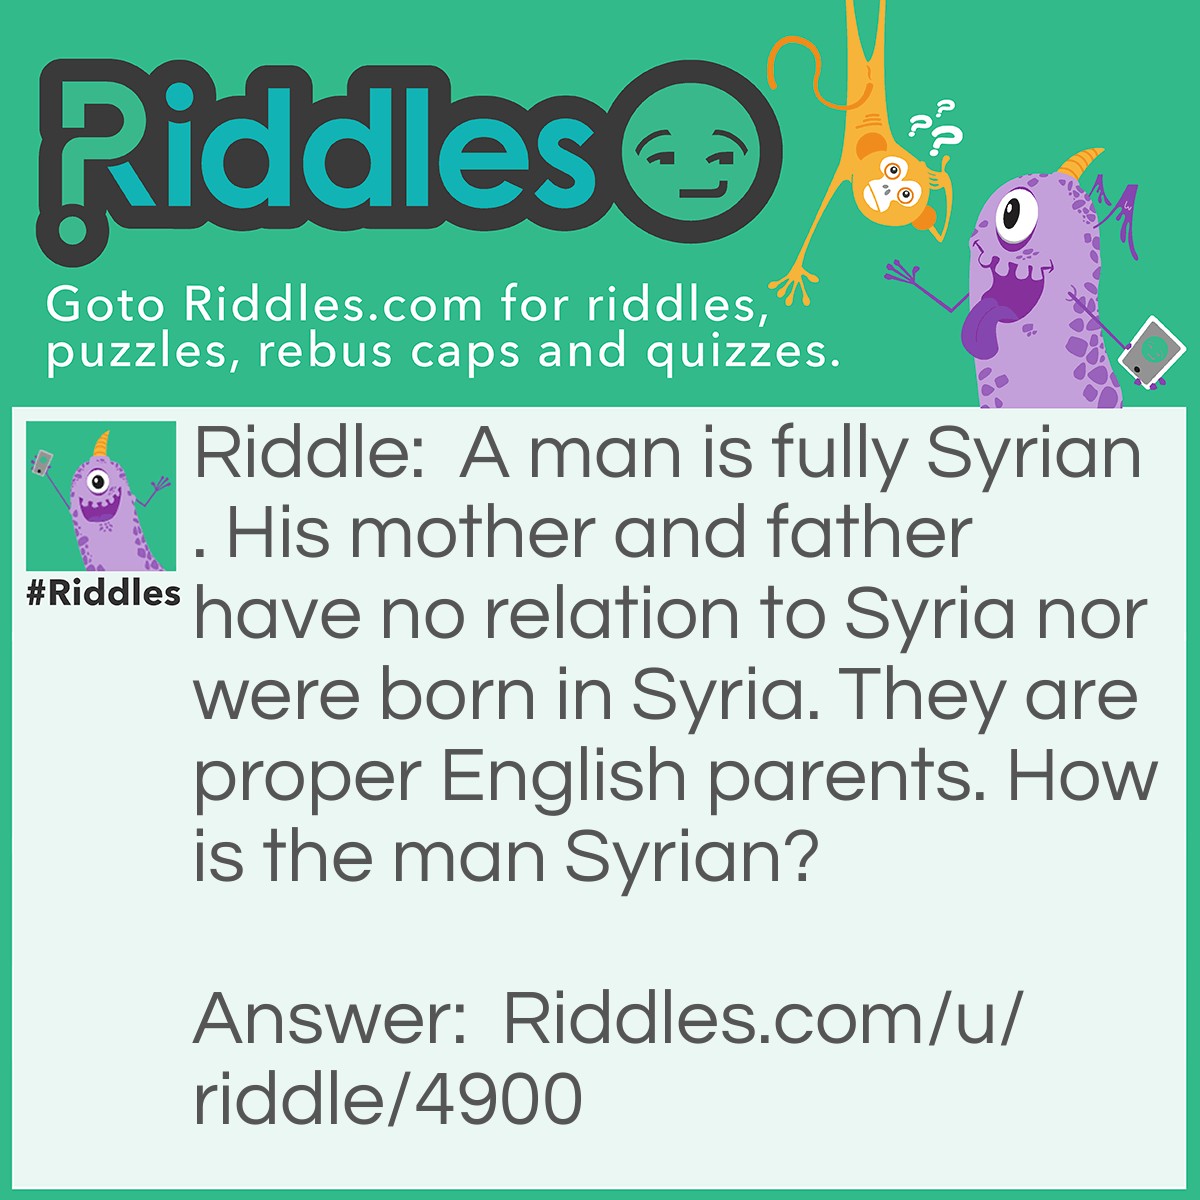 Riddle: A man is fully Syrian. His mother and father have no relation to Syria nor were born in Syria. They are proper English parents. How is the man Syrian? Answer: He was adopted by the English family.